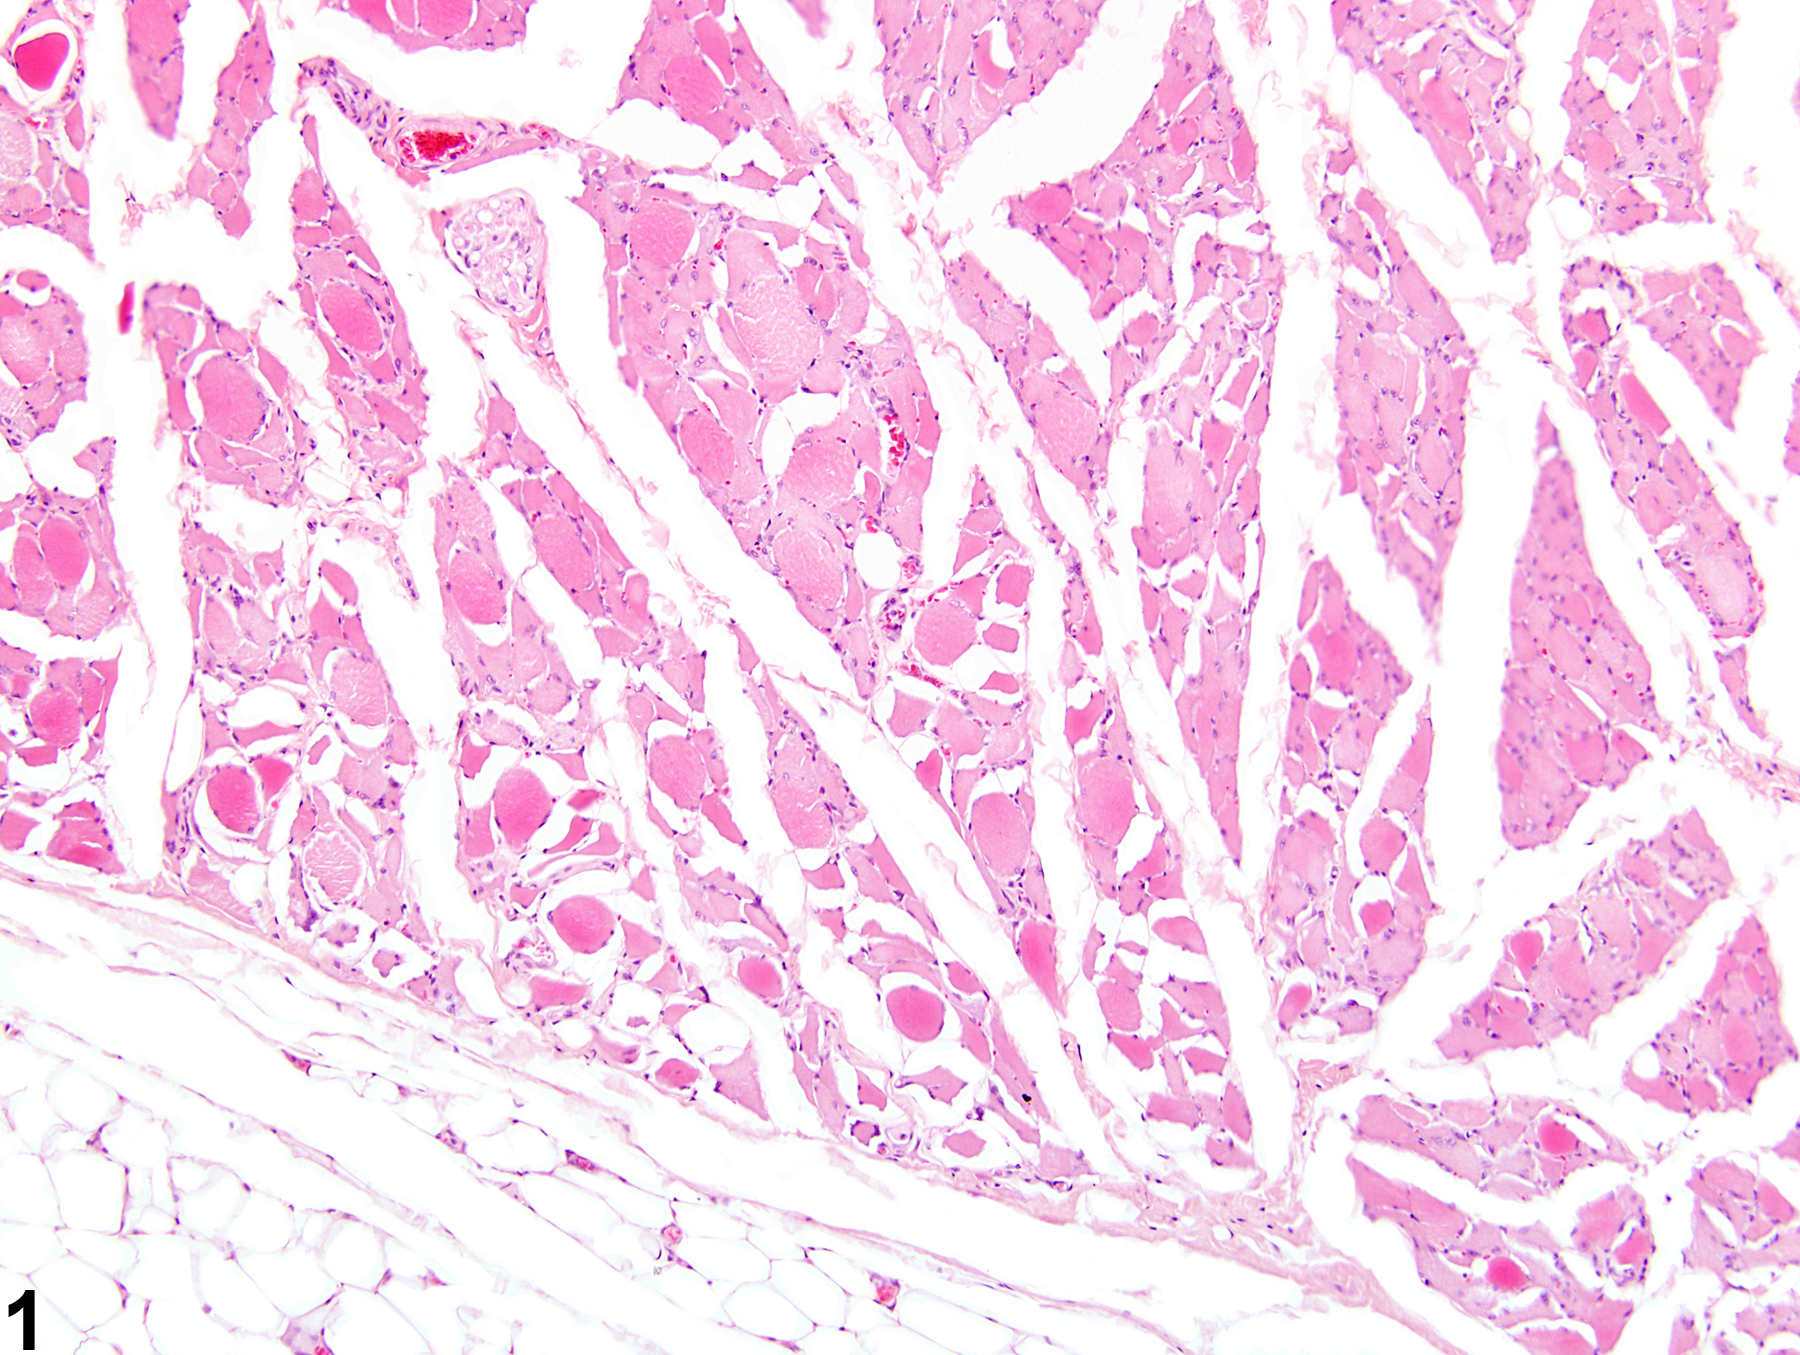 Image of atrophy in the skeletal muscle from a male F344/N rat in a chronic study